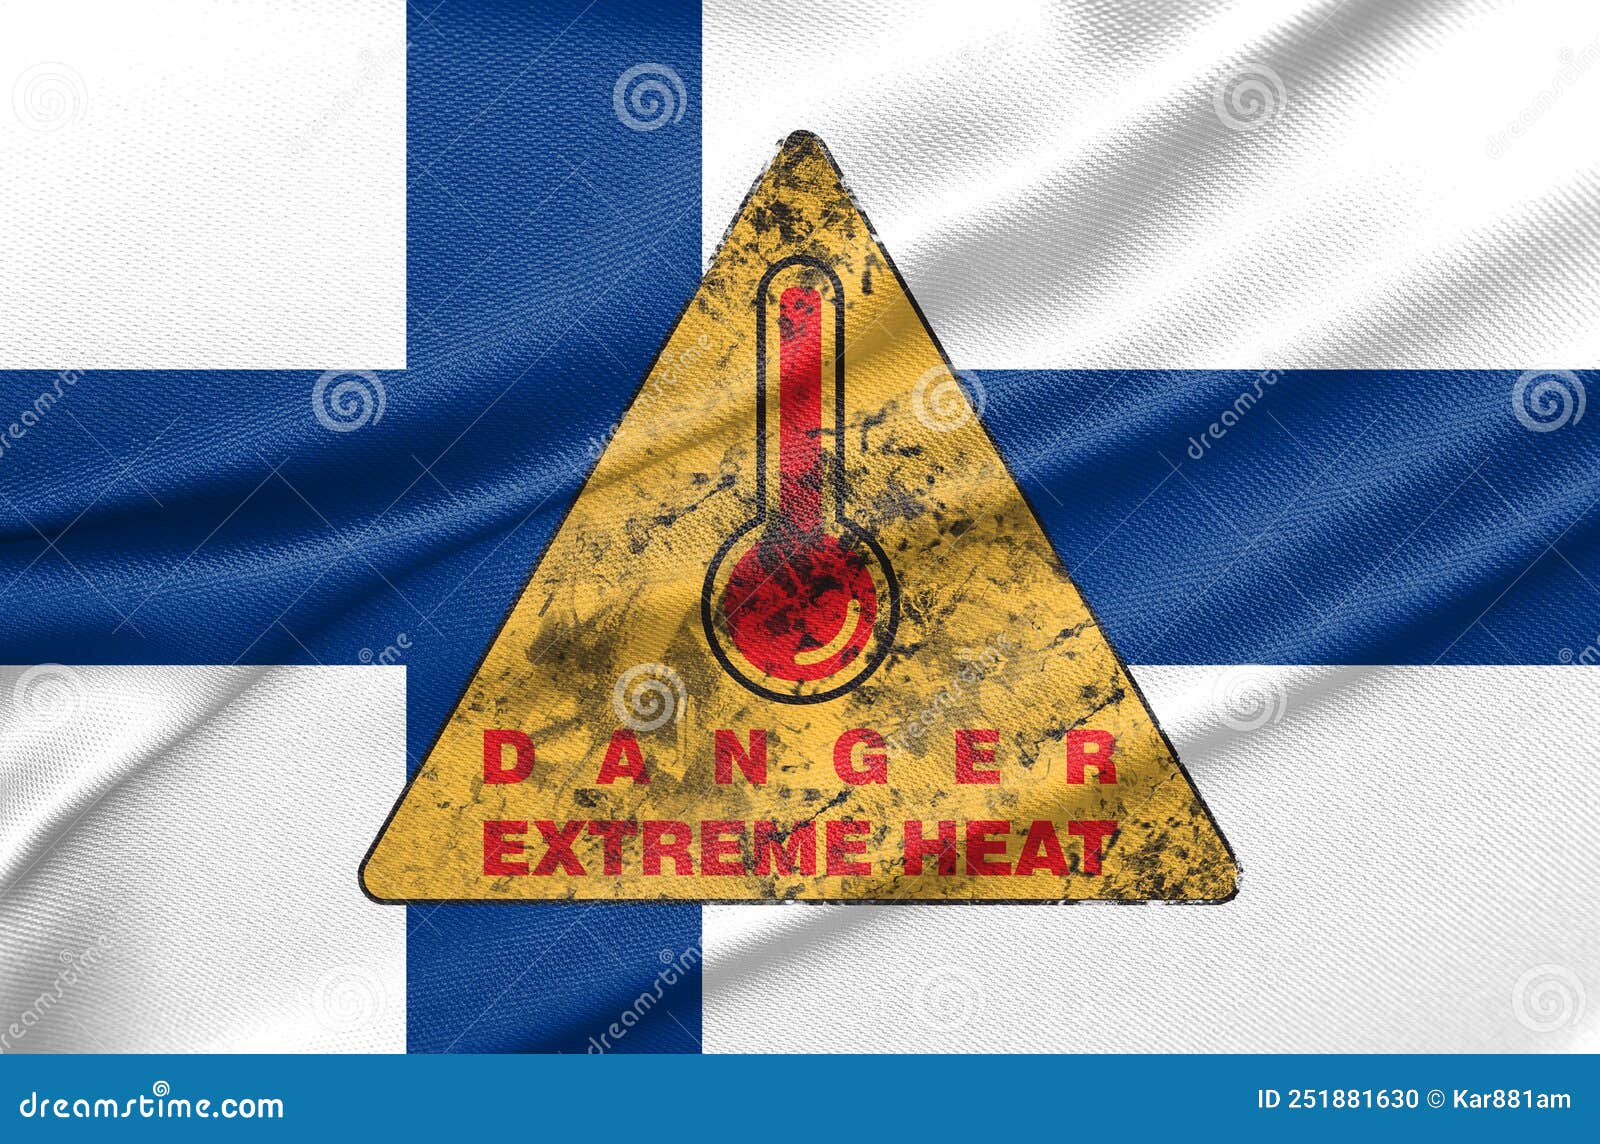 danger extreme heat in finlandia, heatwave in finlandia, flag finlandia with text extreme heat, 3d work and 3d image